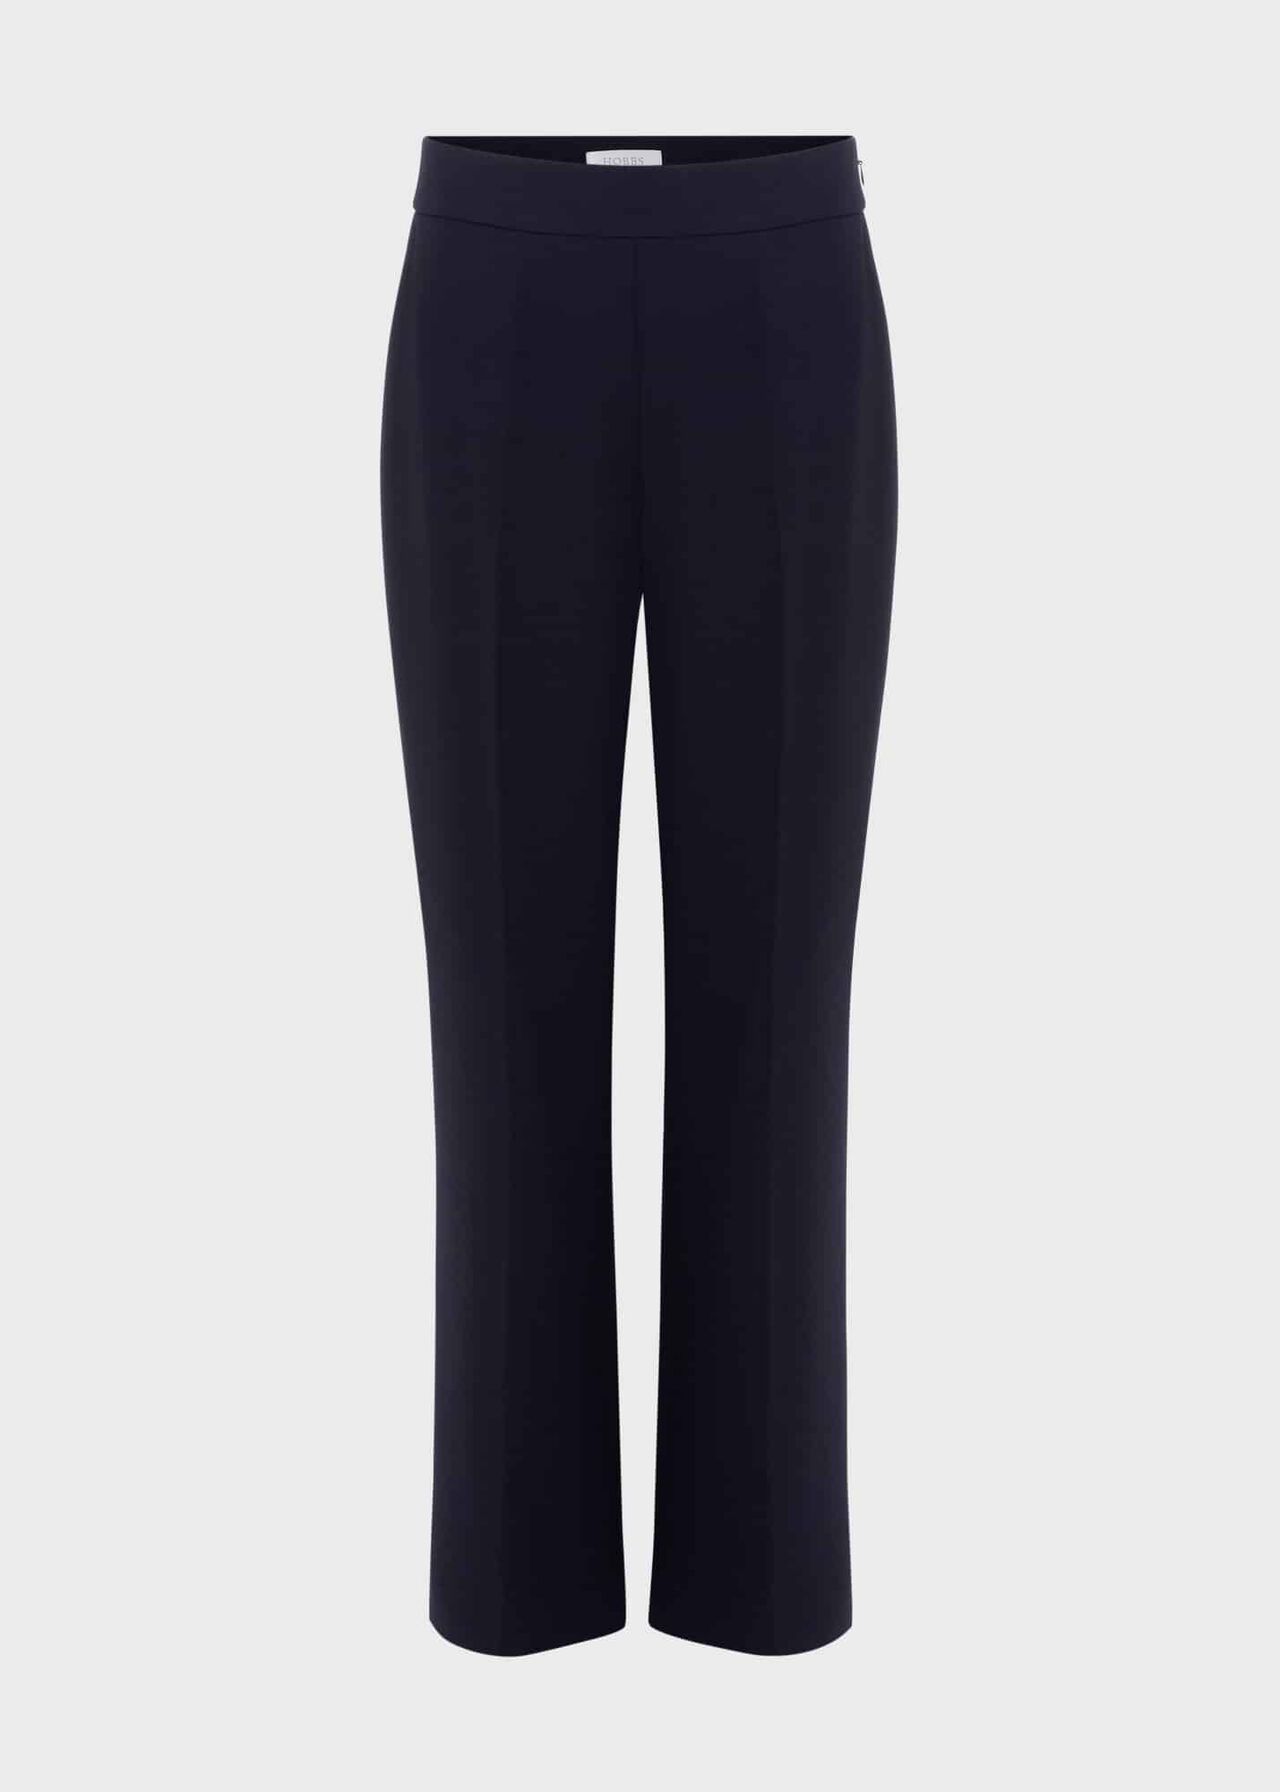 Stevie Wide Trousers, Navy, hi-res